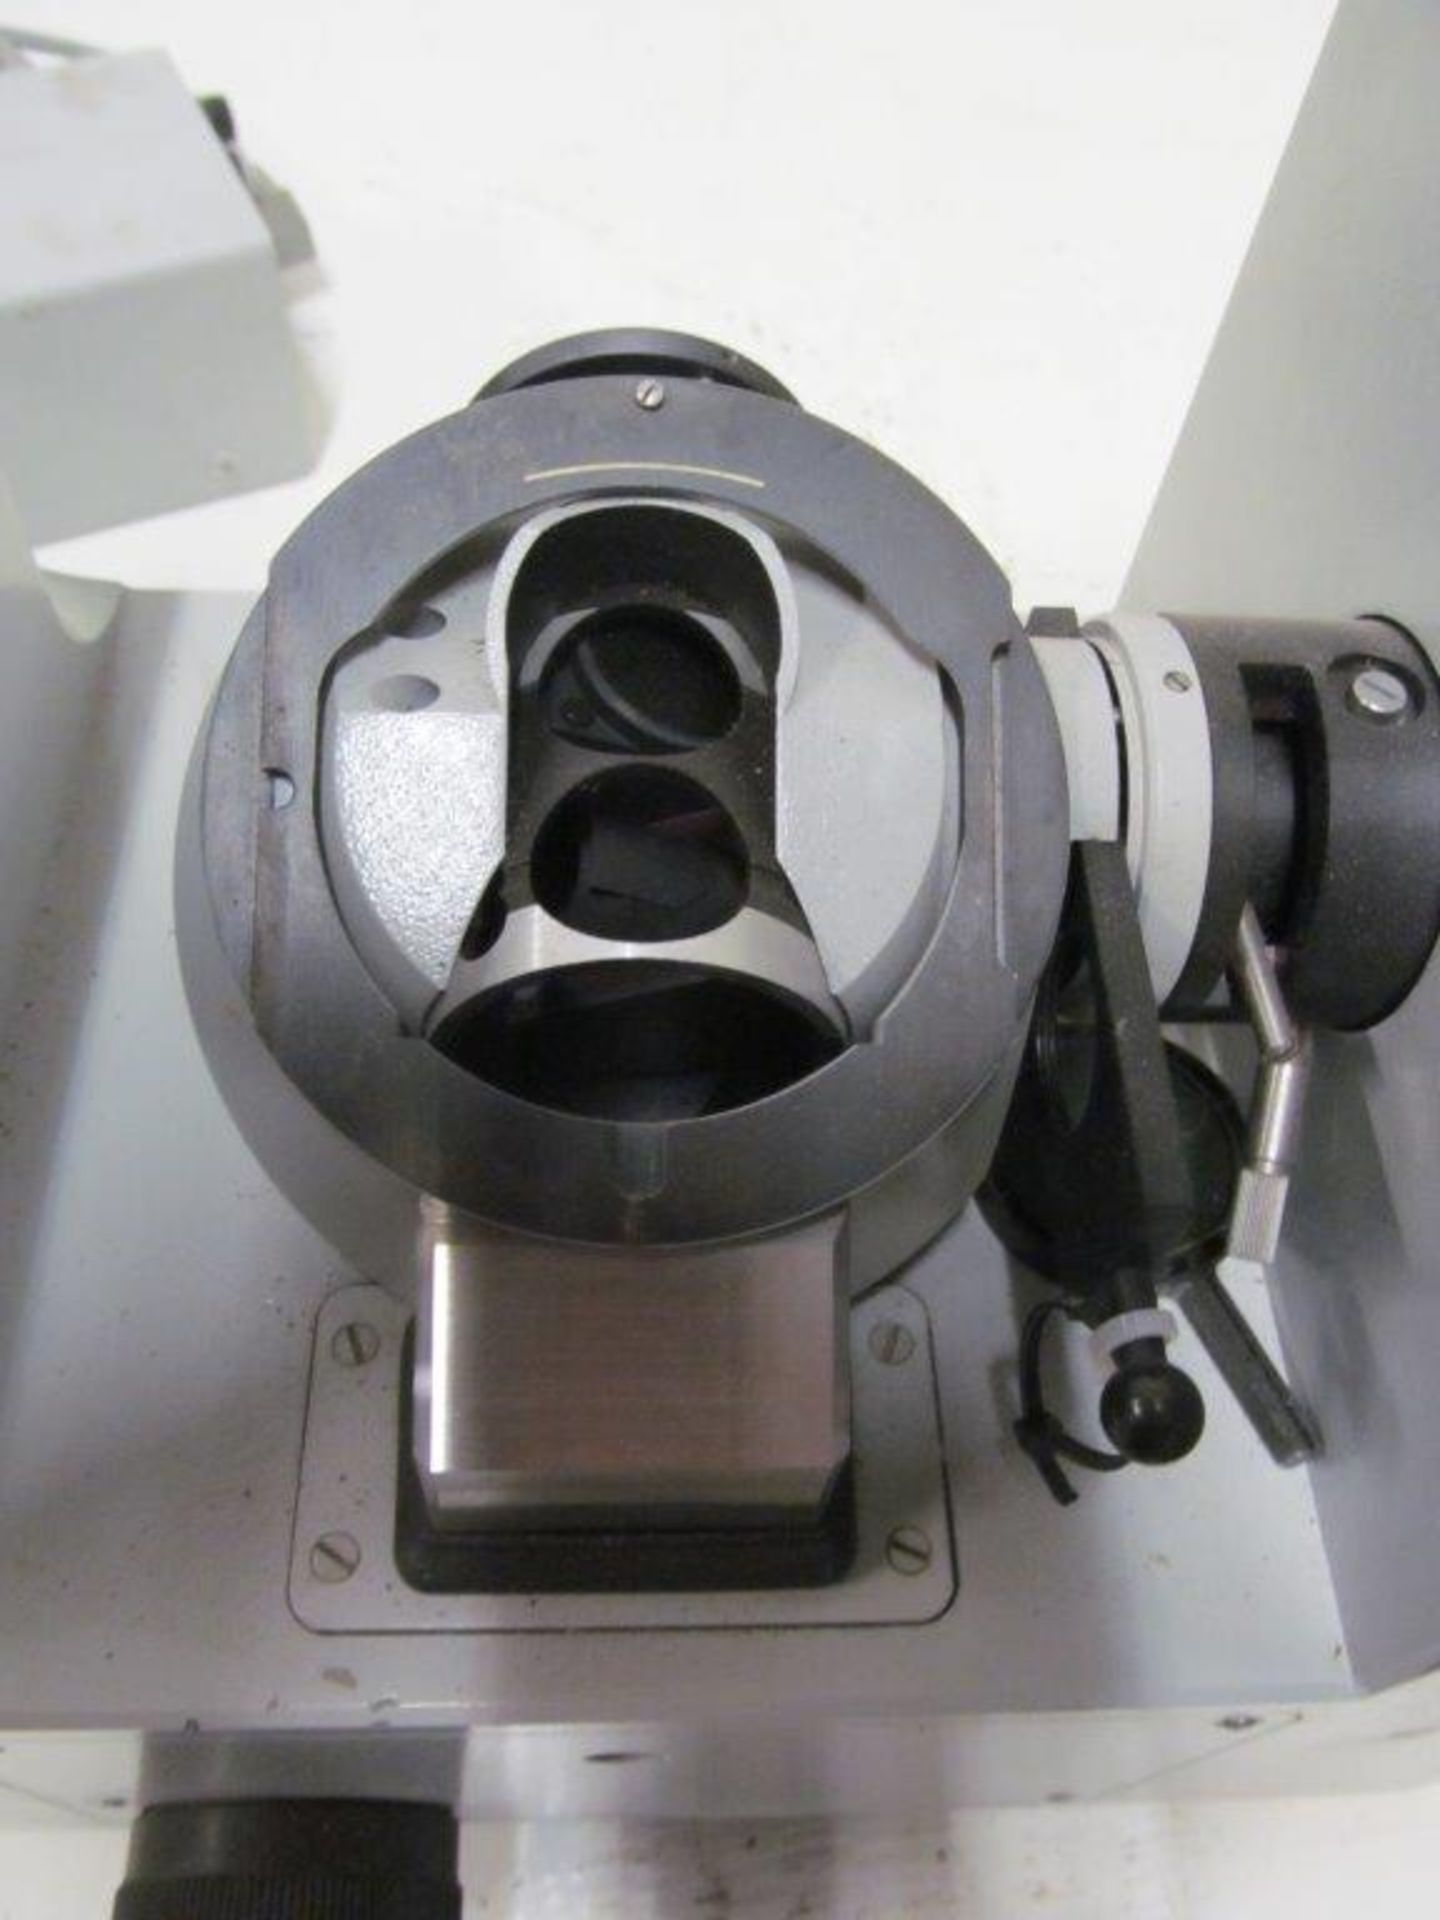 ZEISS MICROSCOPE LENSES (GERMANY) - LOCATION, HAWKESBURY, ONTARIO - Image 5 of 5